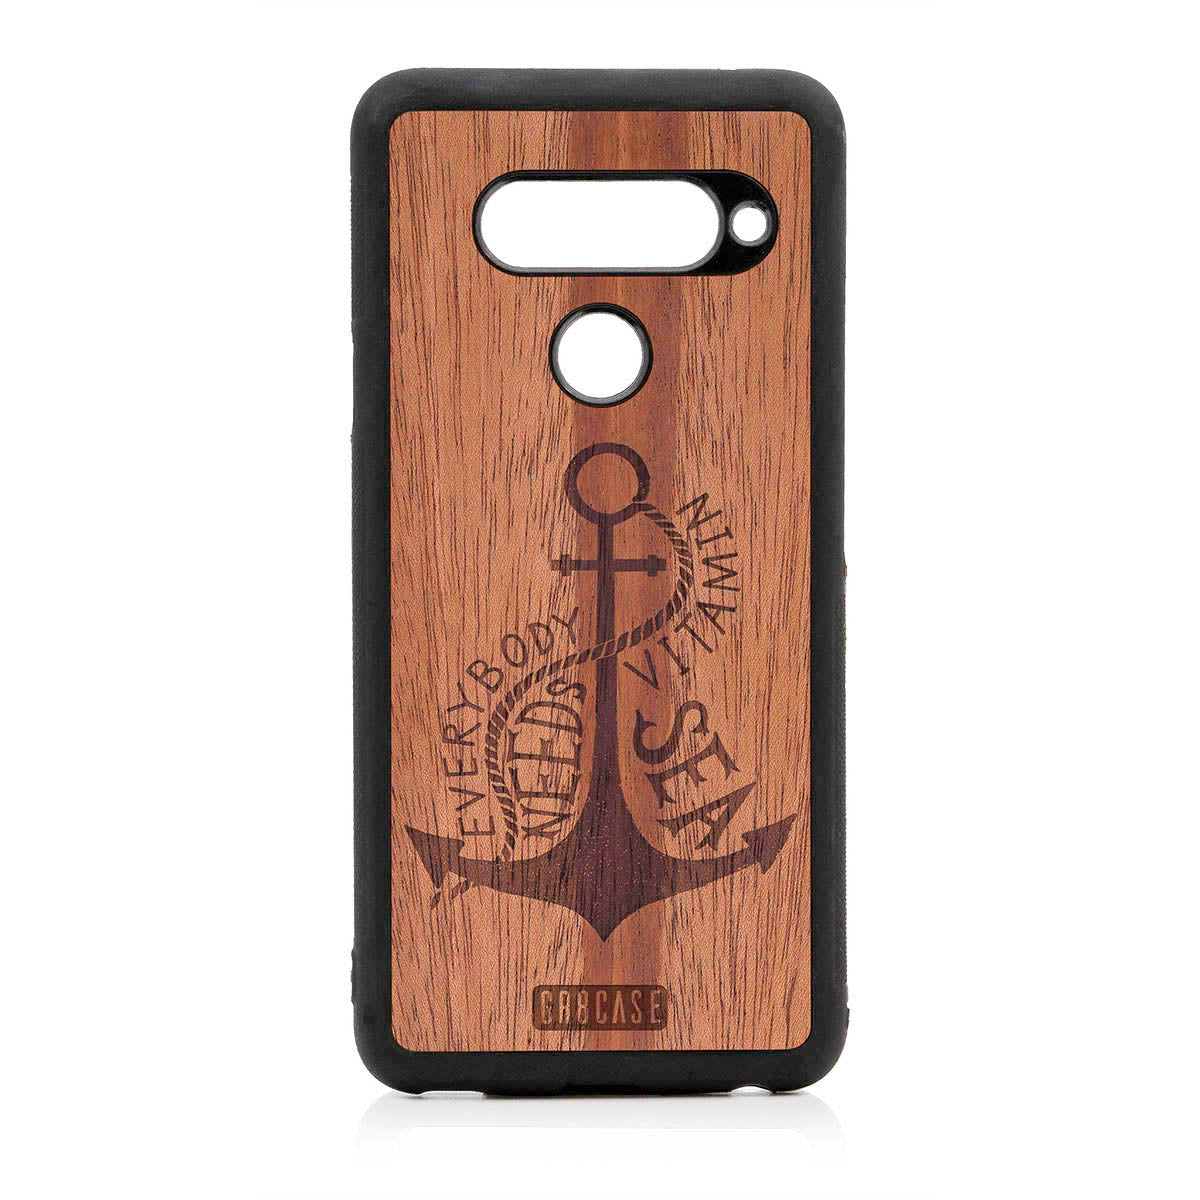 Everybody Needs Vitamin Sea (Anchor) Design Wood Case For LG V40 by GR8CASE